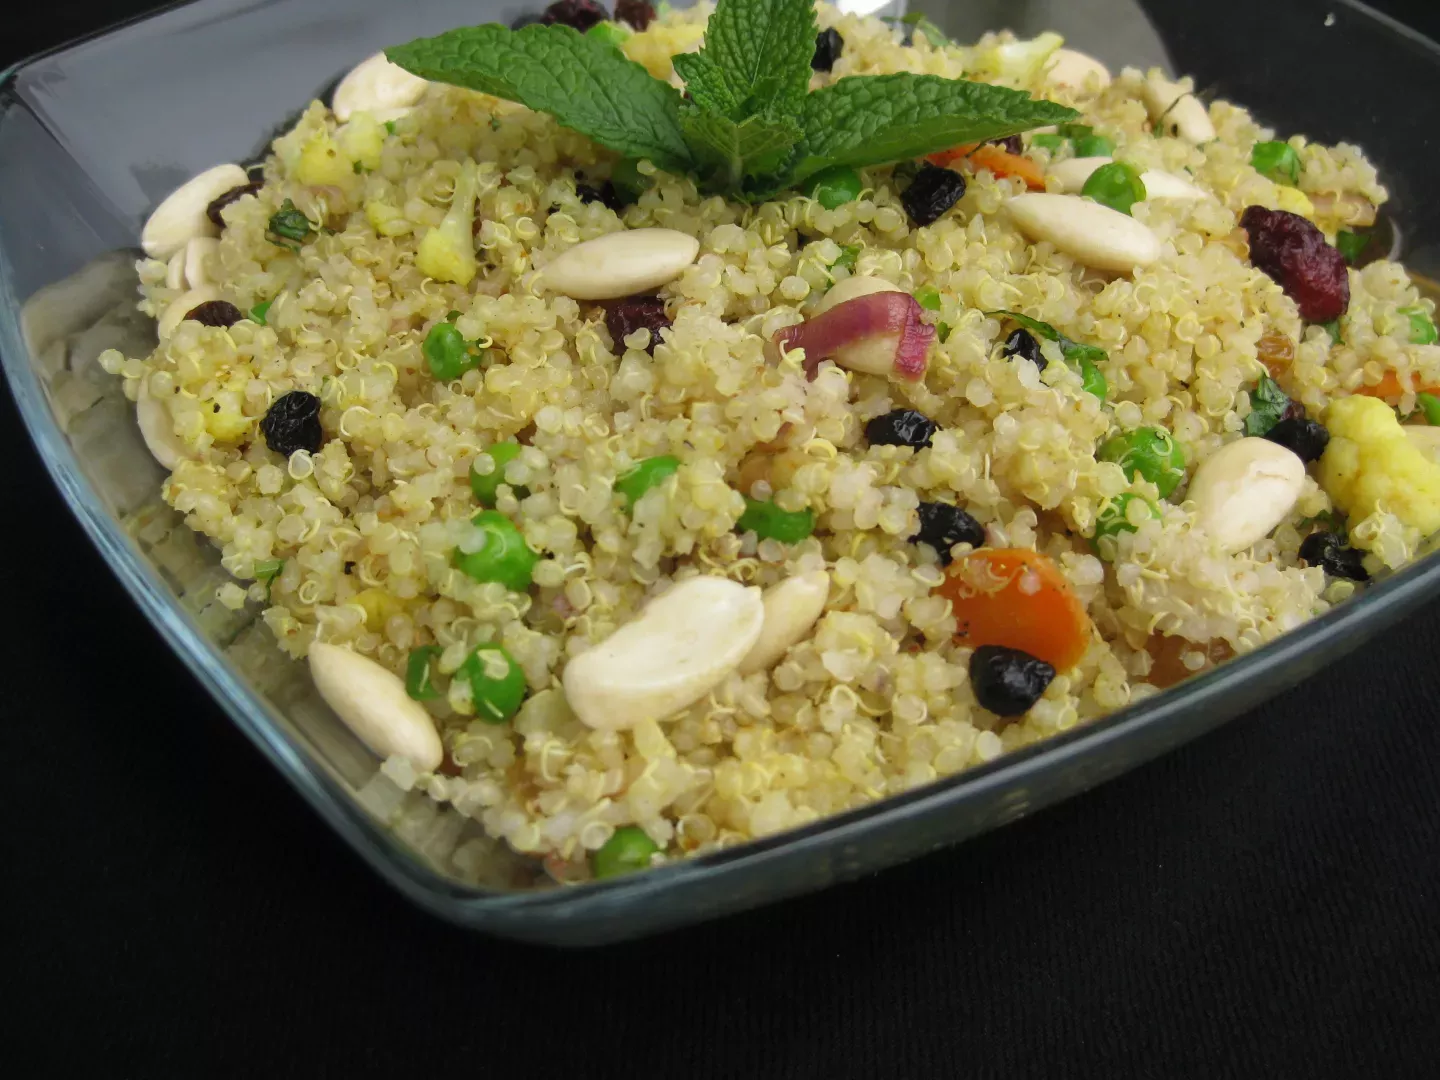 Quinoa pilaf with berries and soaked almonds, Recipe Petitchef